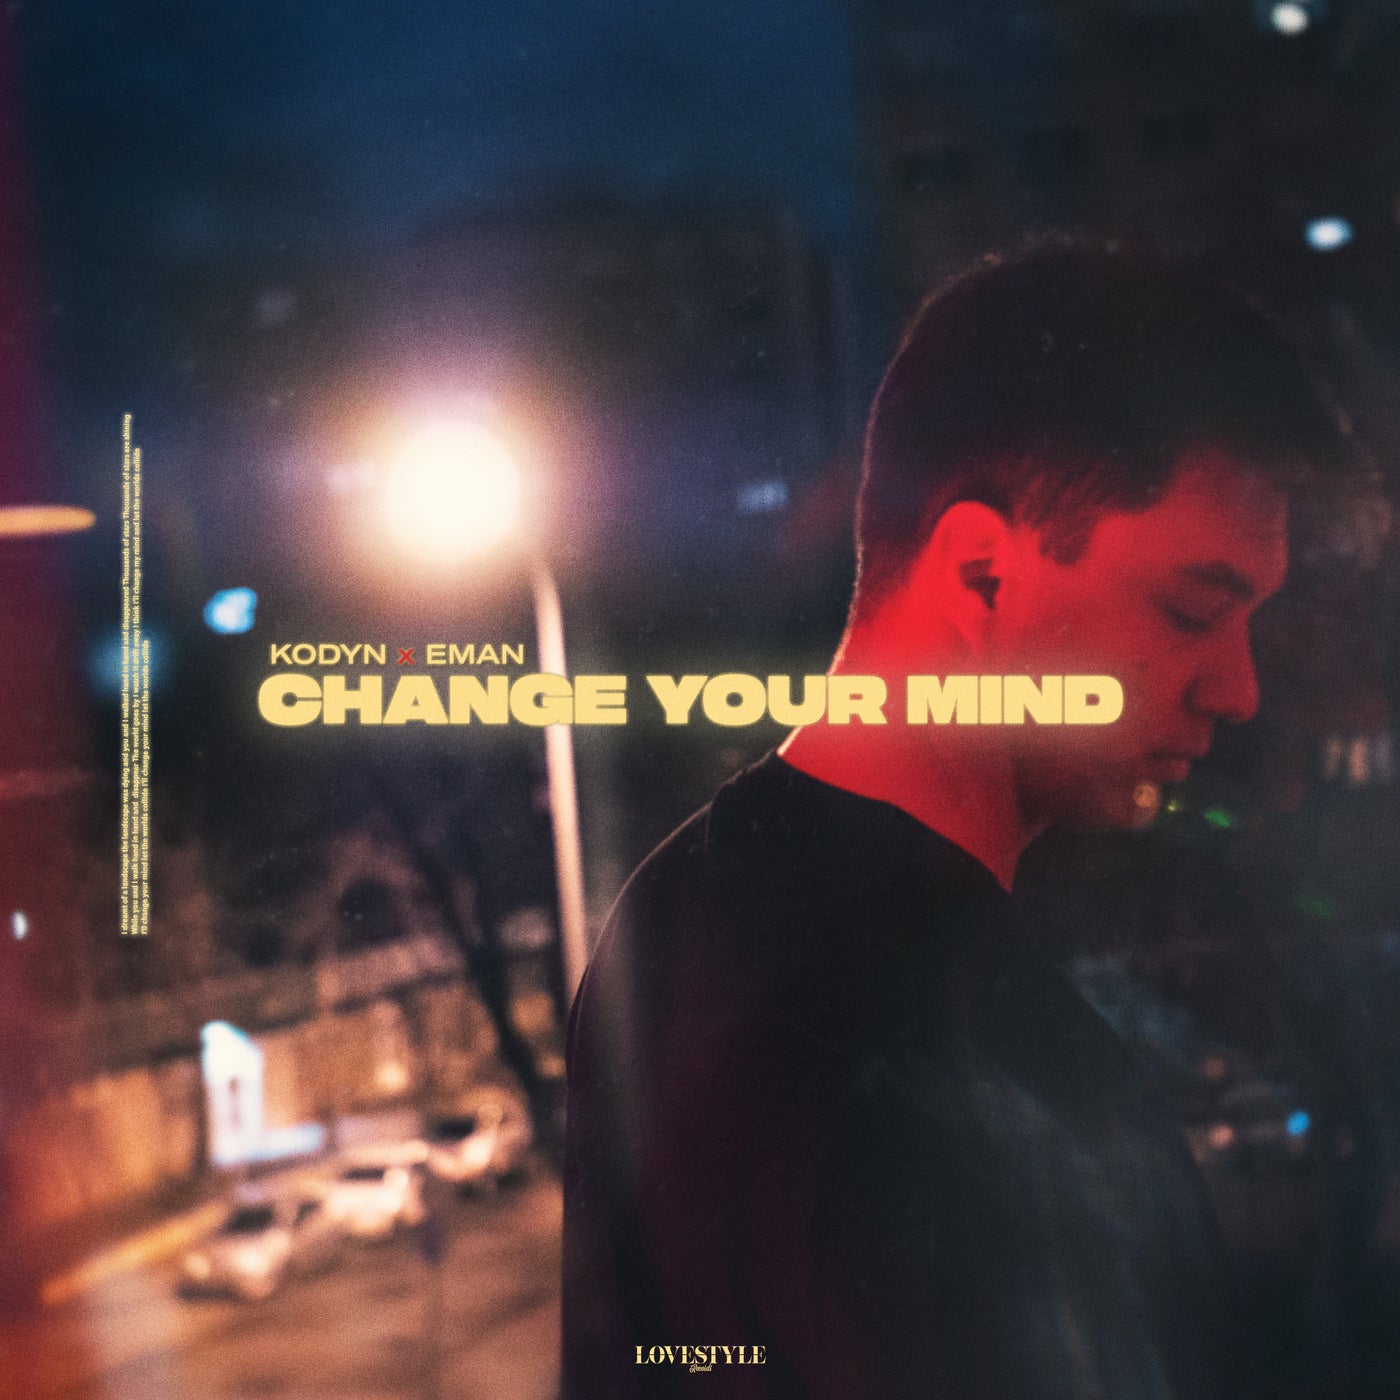 Change Your Mind (Extended Mix)